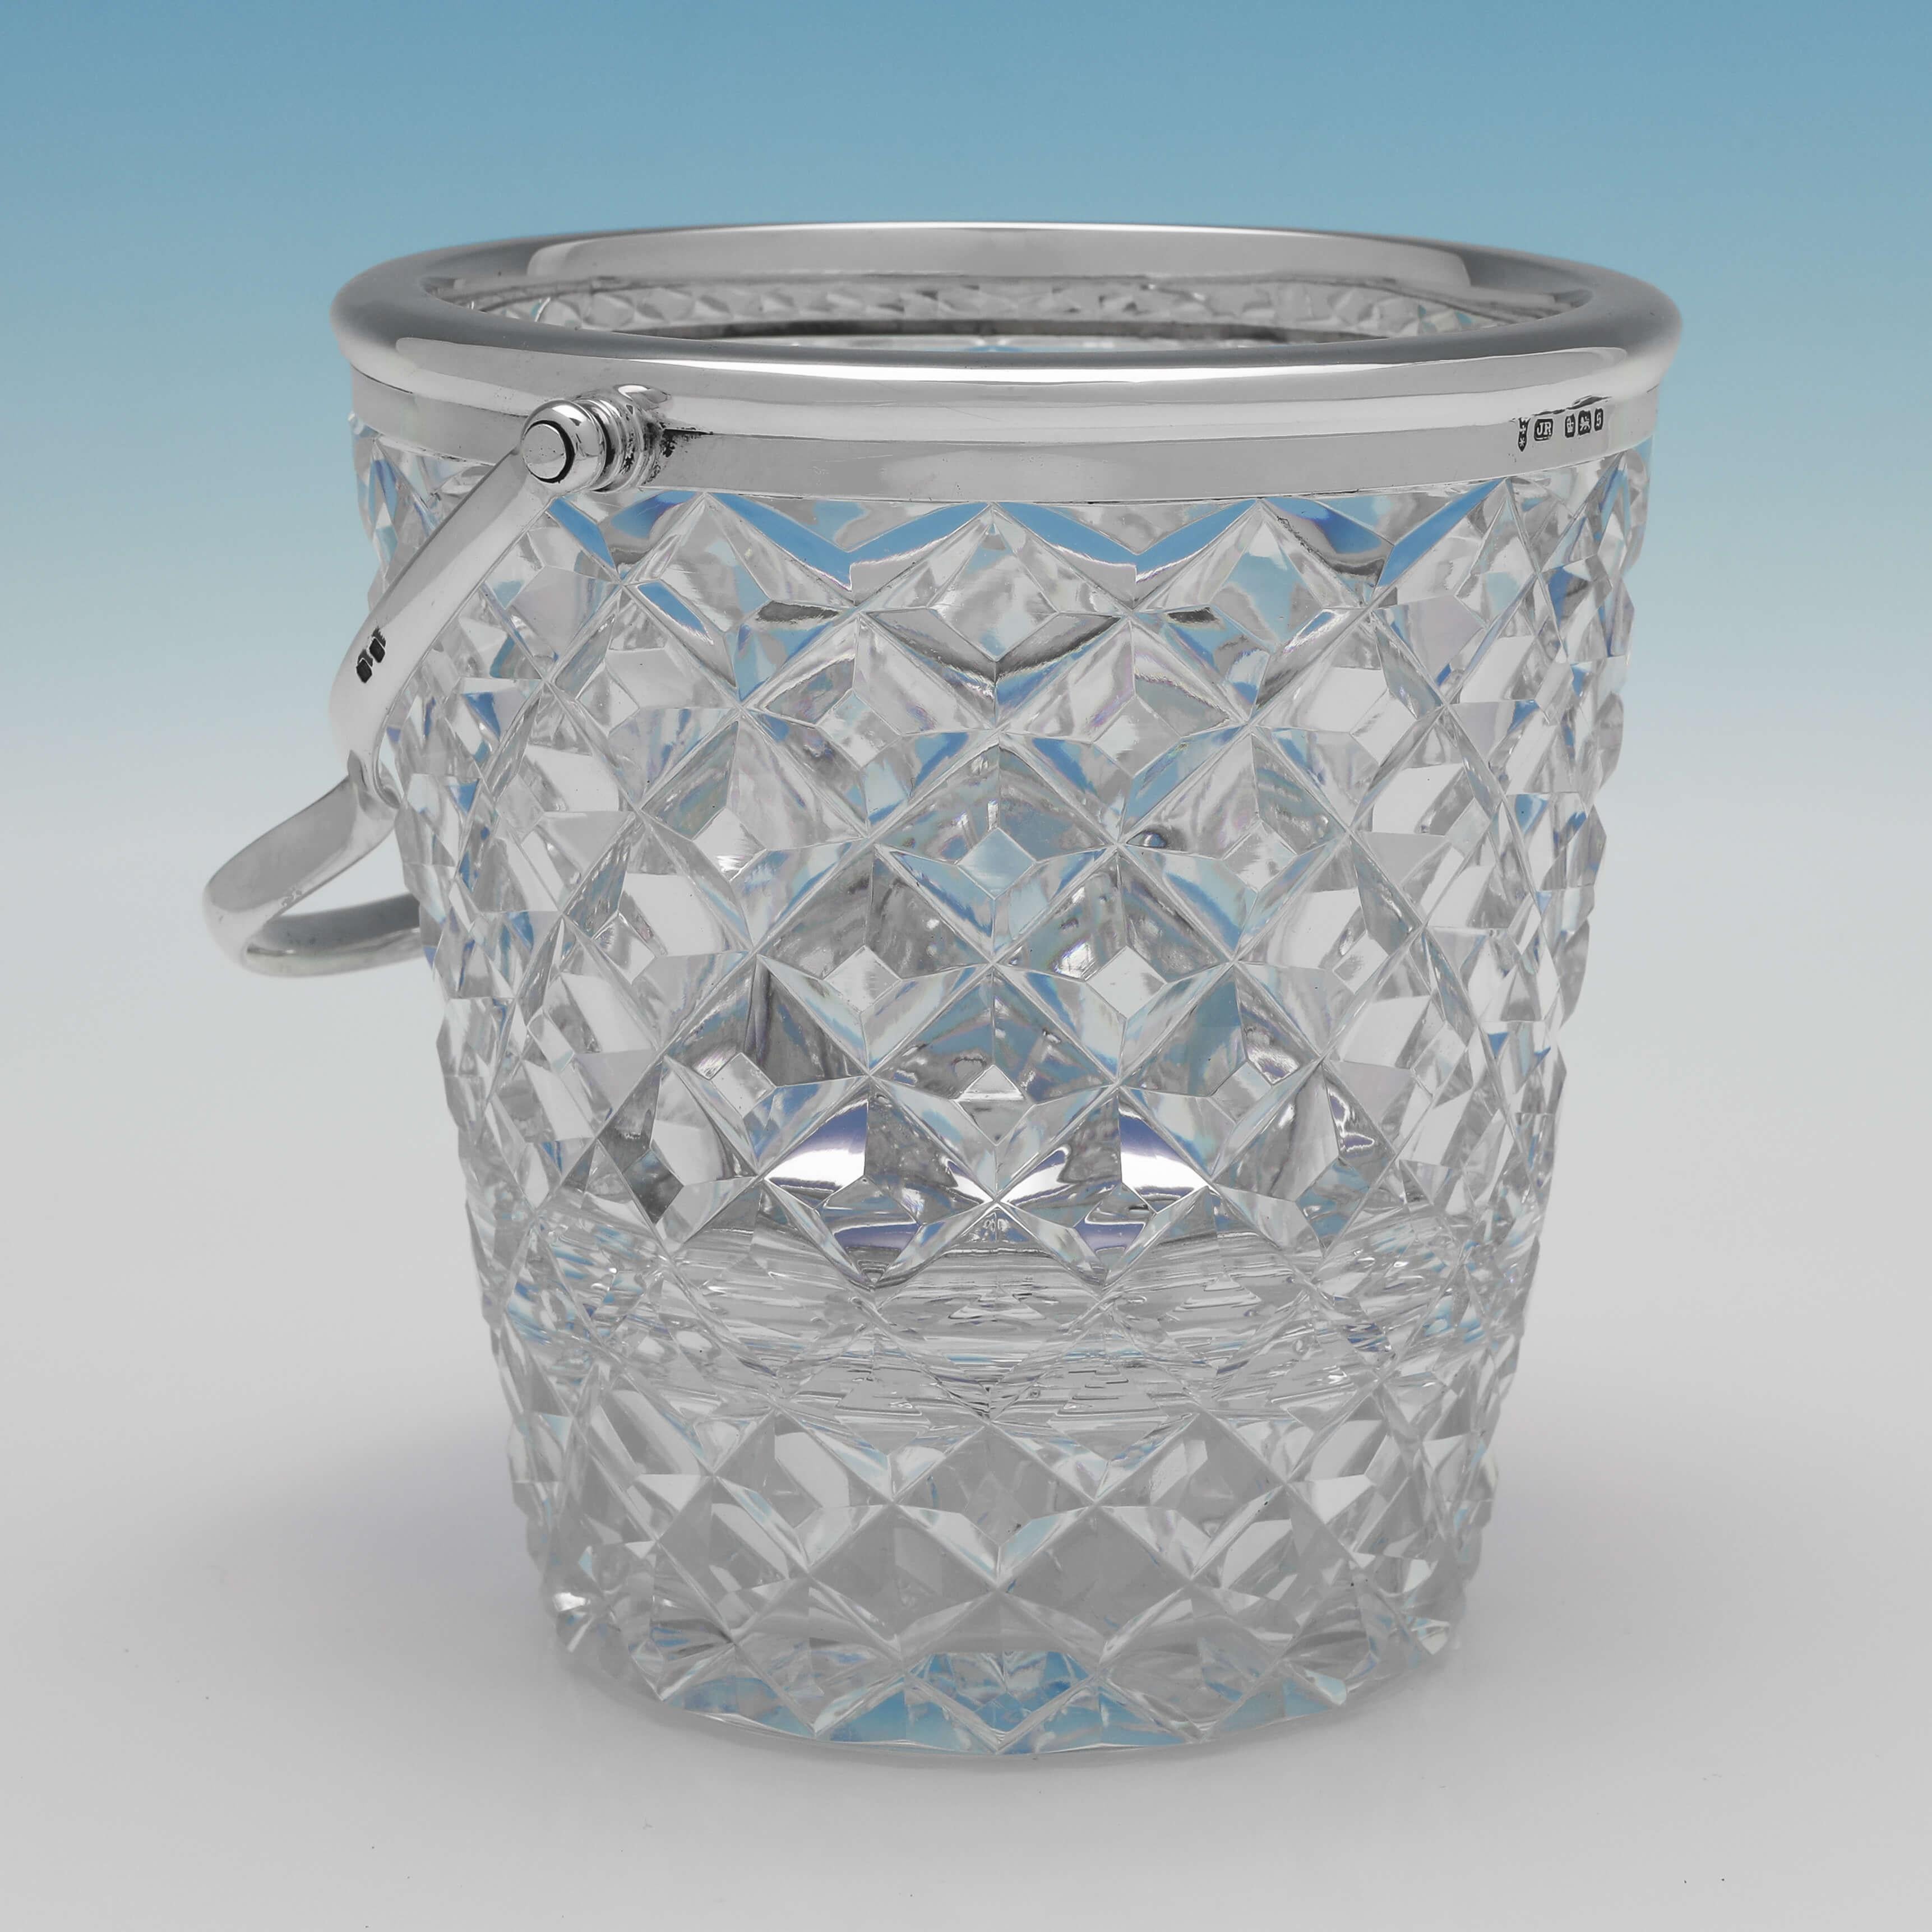 Hallmarked in Sheffield in 1910 by John Round & Son Ltd., this attractive, Edwardian, Antique Glass & Sterling Silver Ice Bucket, features a stylish cut glass body, silver rim and handle, and a removable silver ice strainer. The ice bucket measures